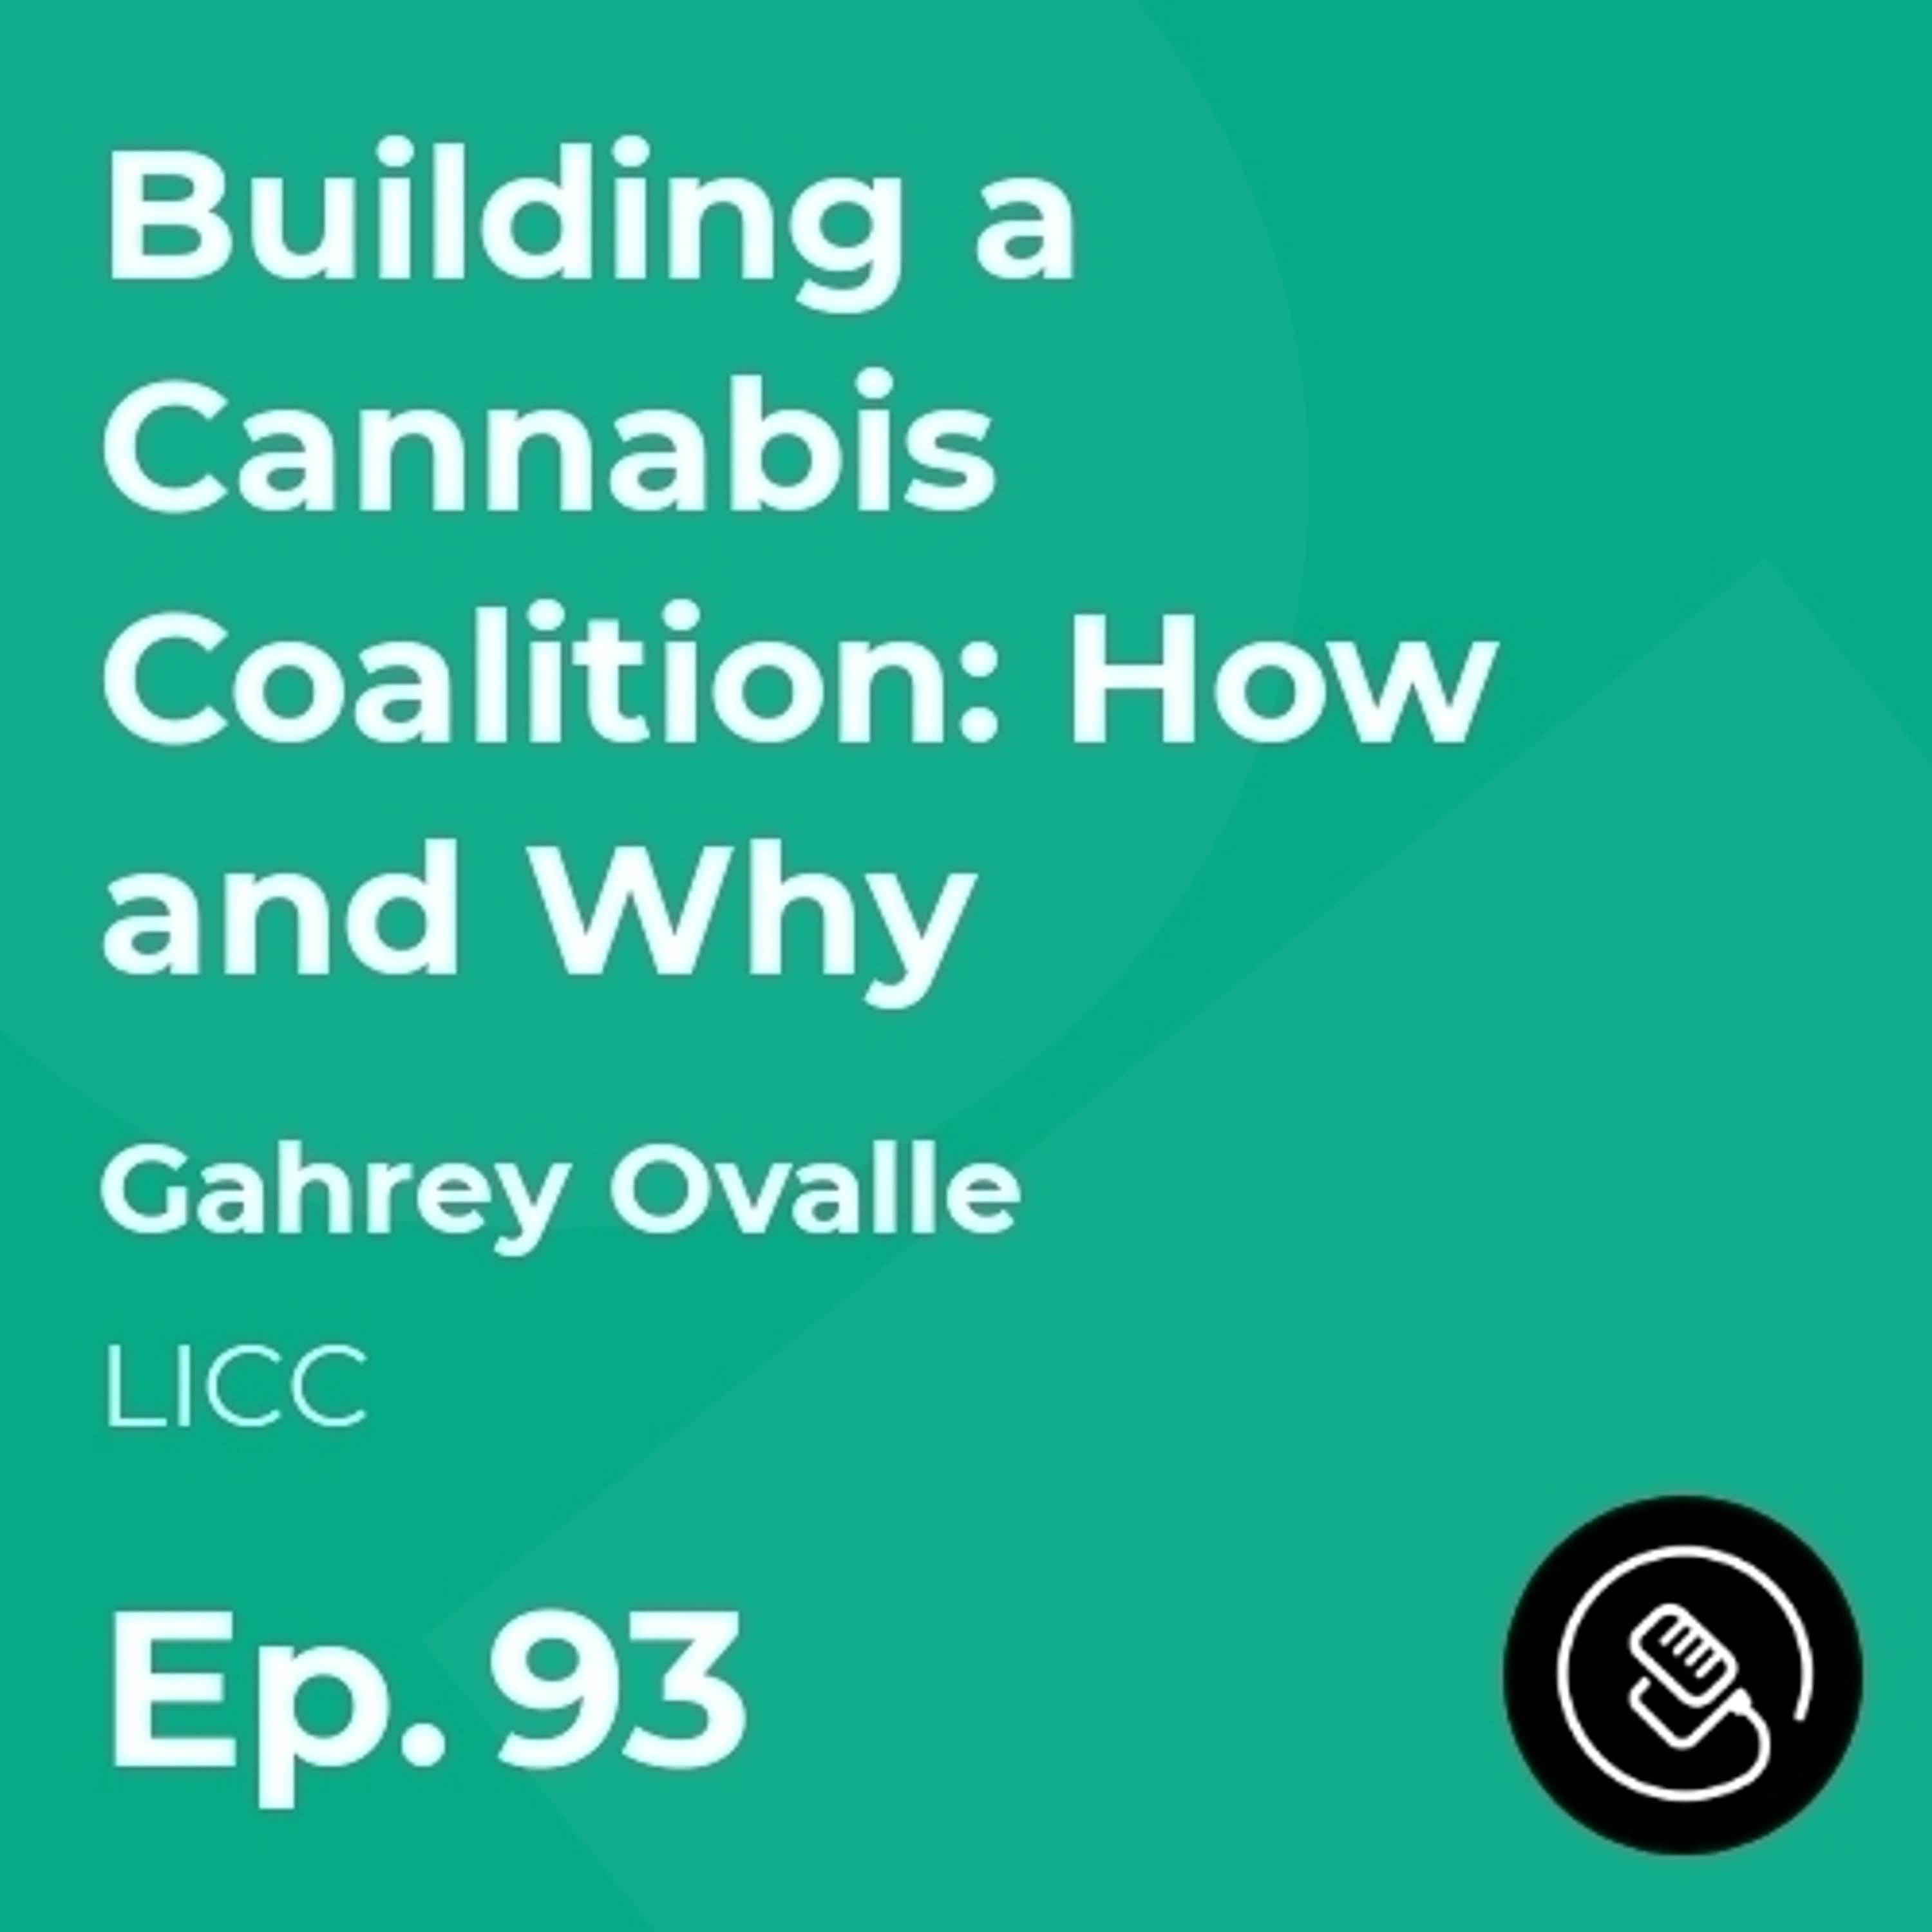 Building a Cannabis Coalition: How and Why w/ Gahrey Ovalle from LICC